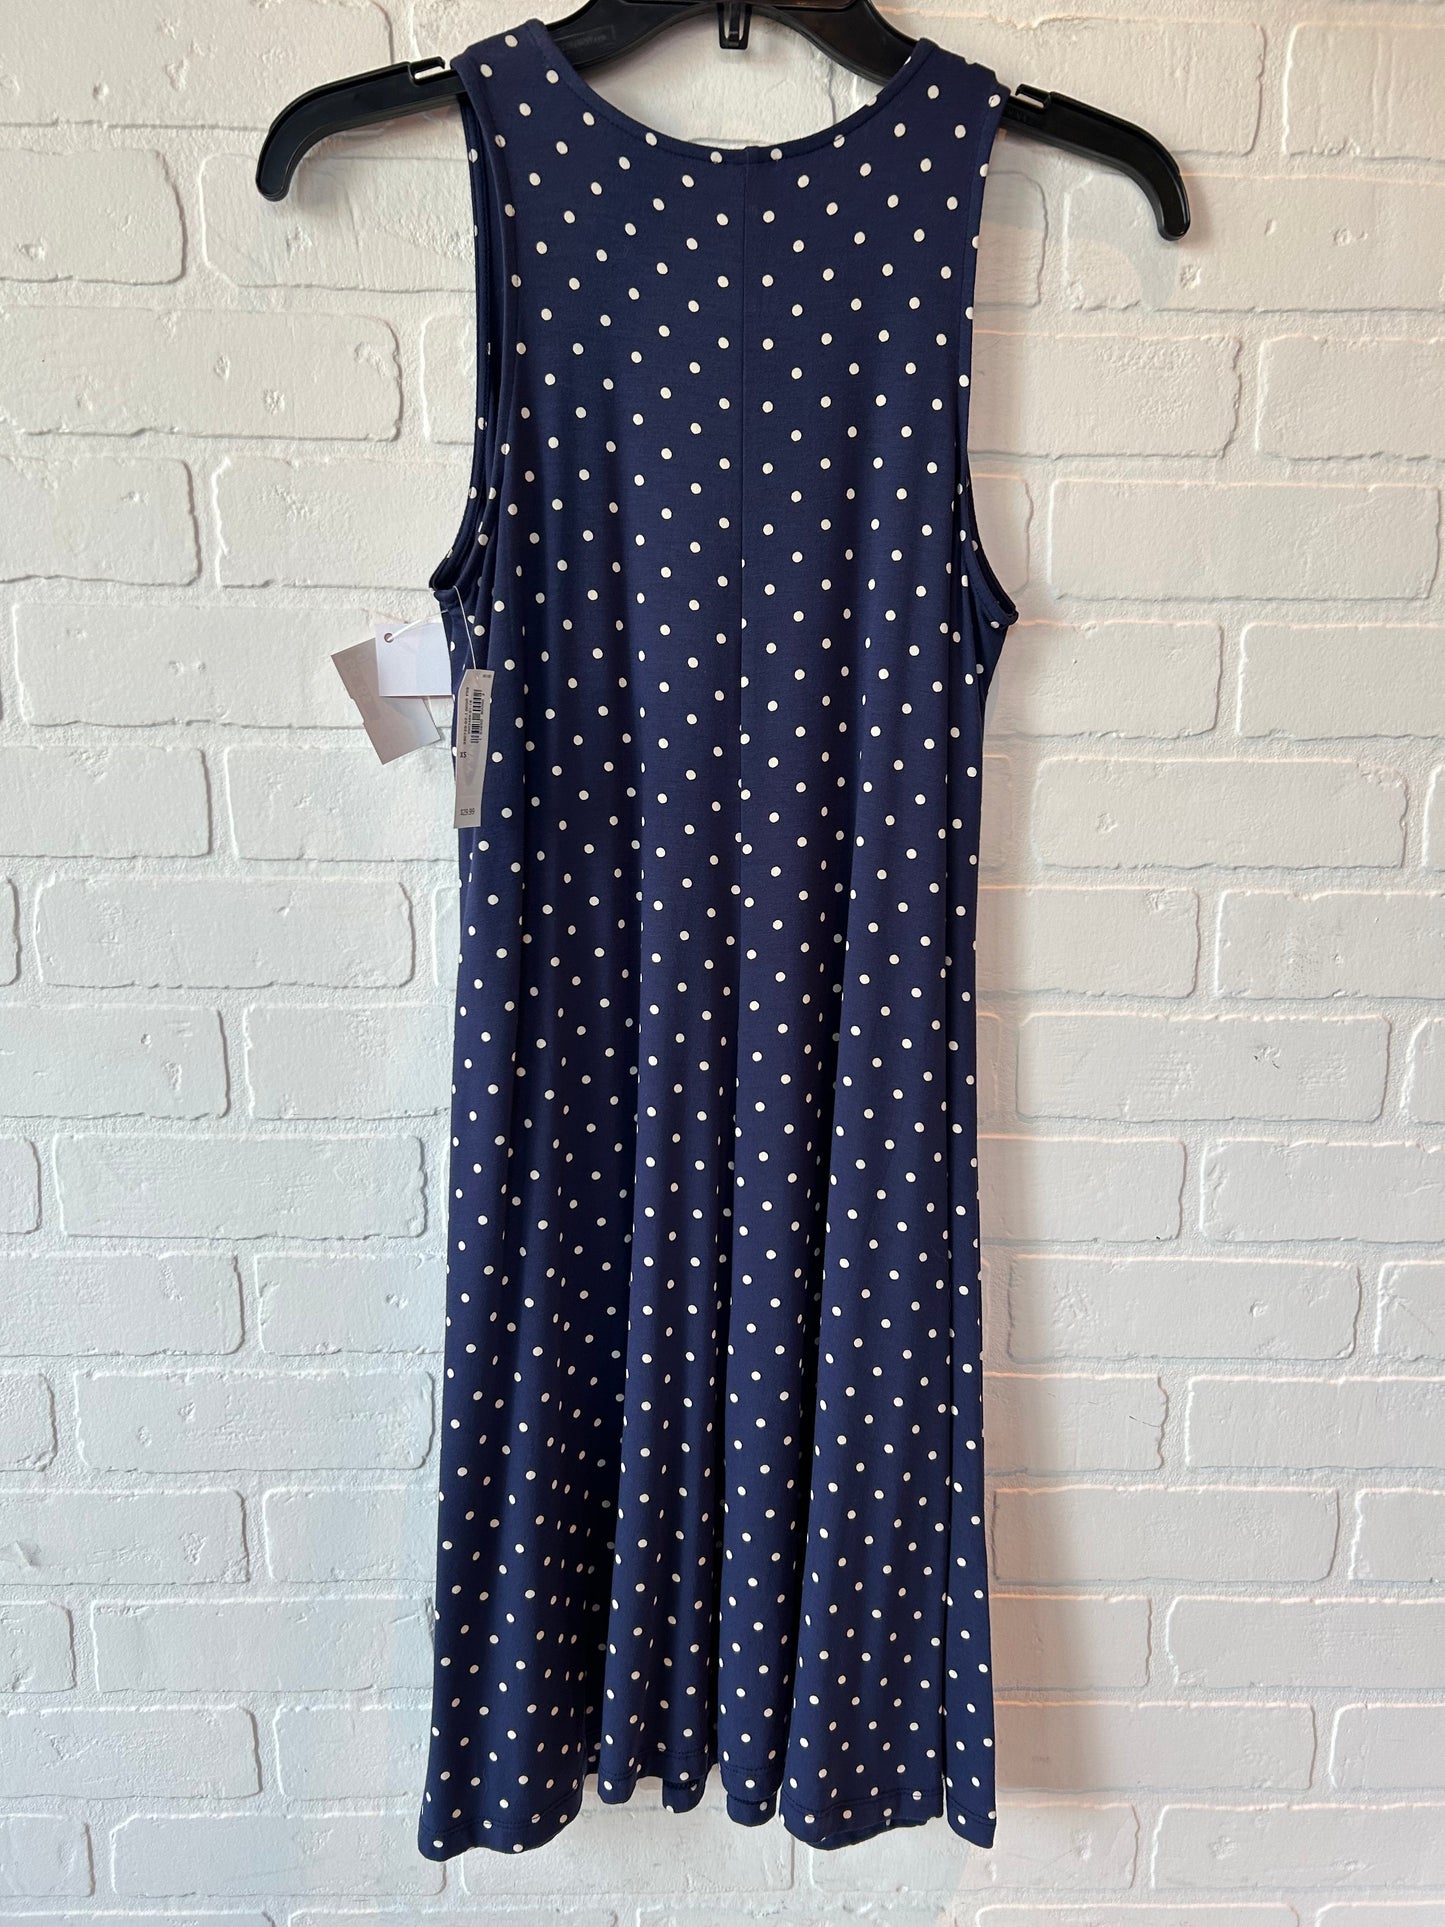 Blue & White Dress Casual Short Old Navy, Size Xs